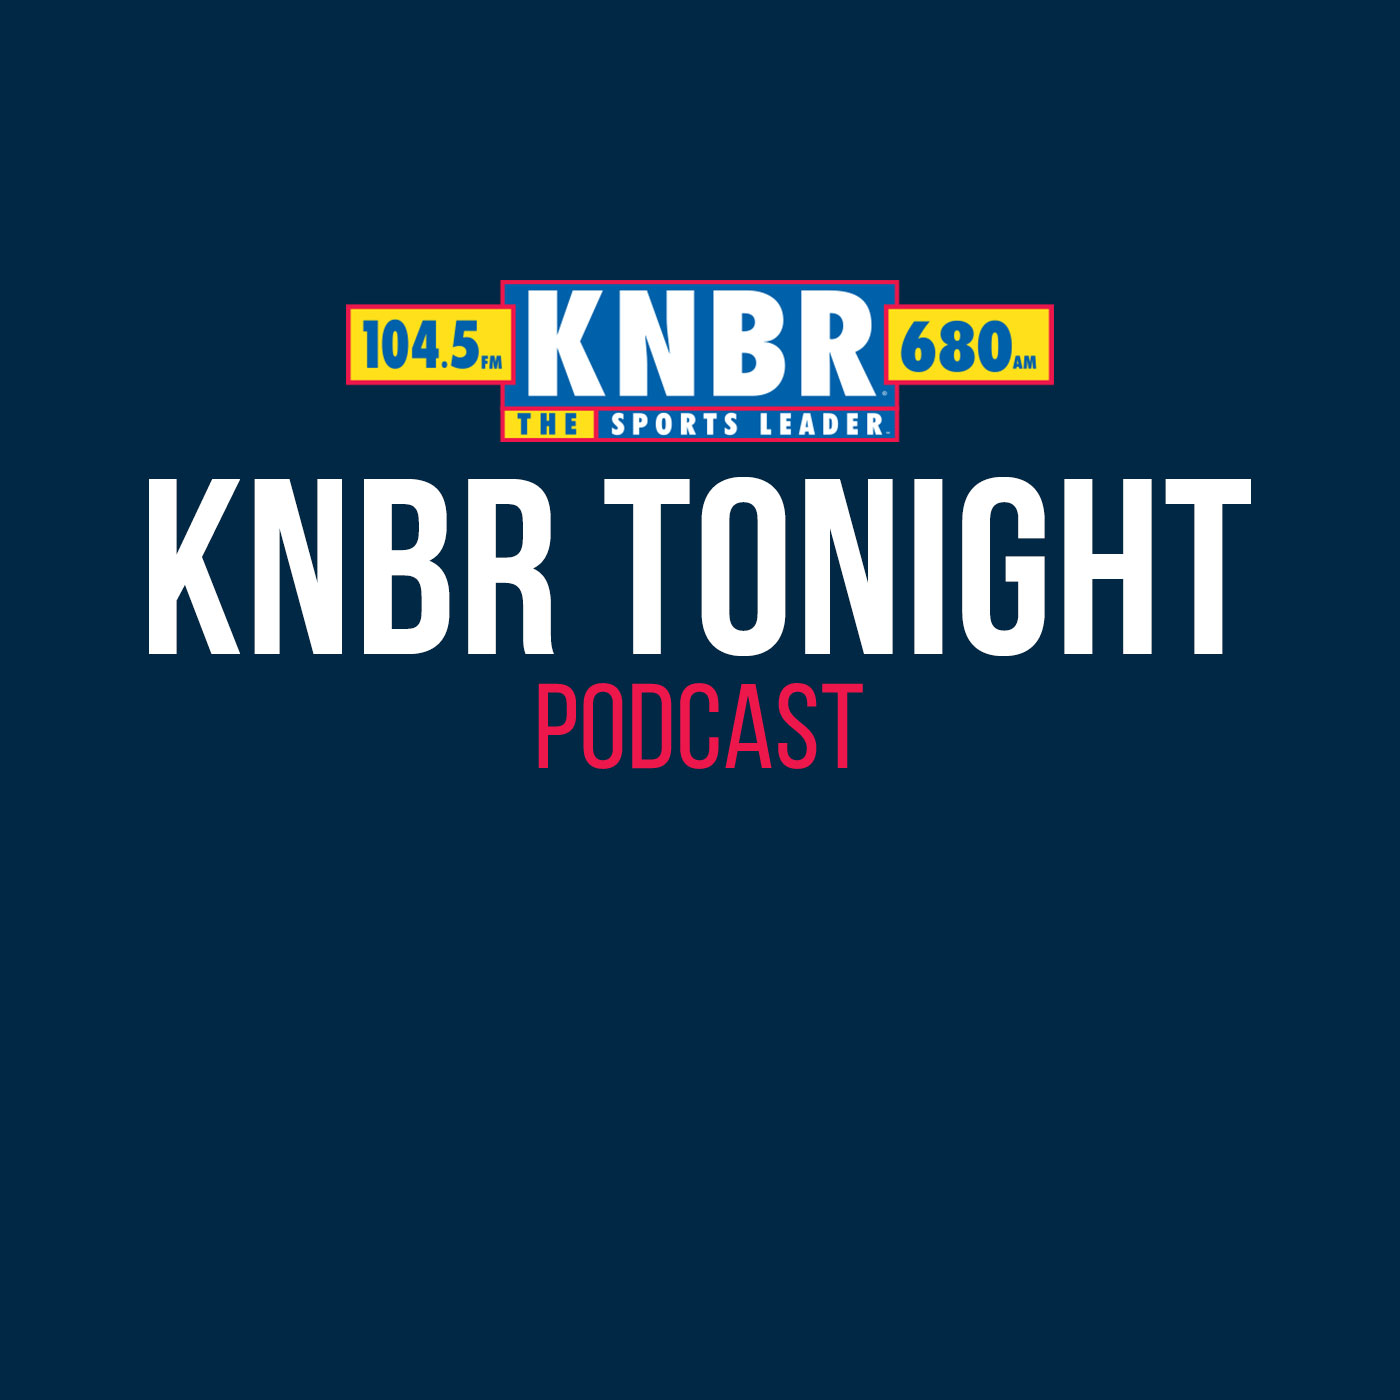 2-11 Cam DeSilva joins KNBR Tonight with Dieter to talk about the Rams having home field advantage in Superbowl LVI